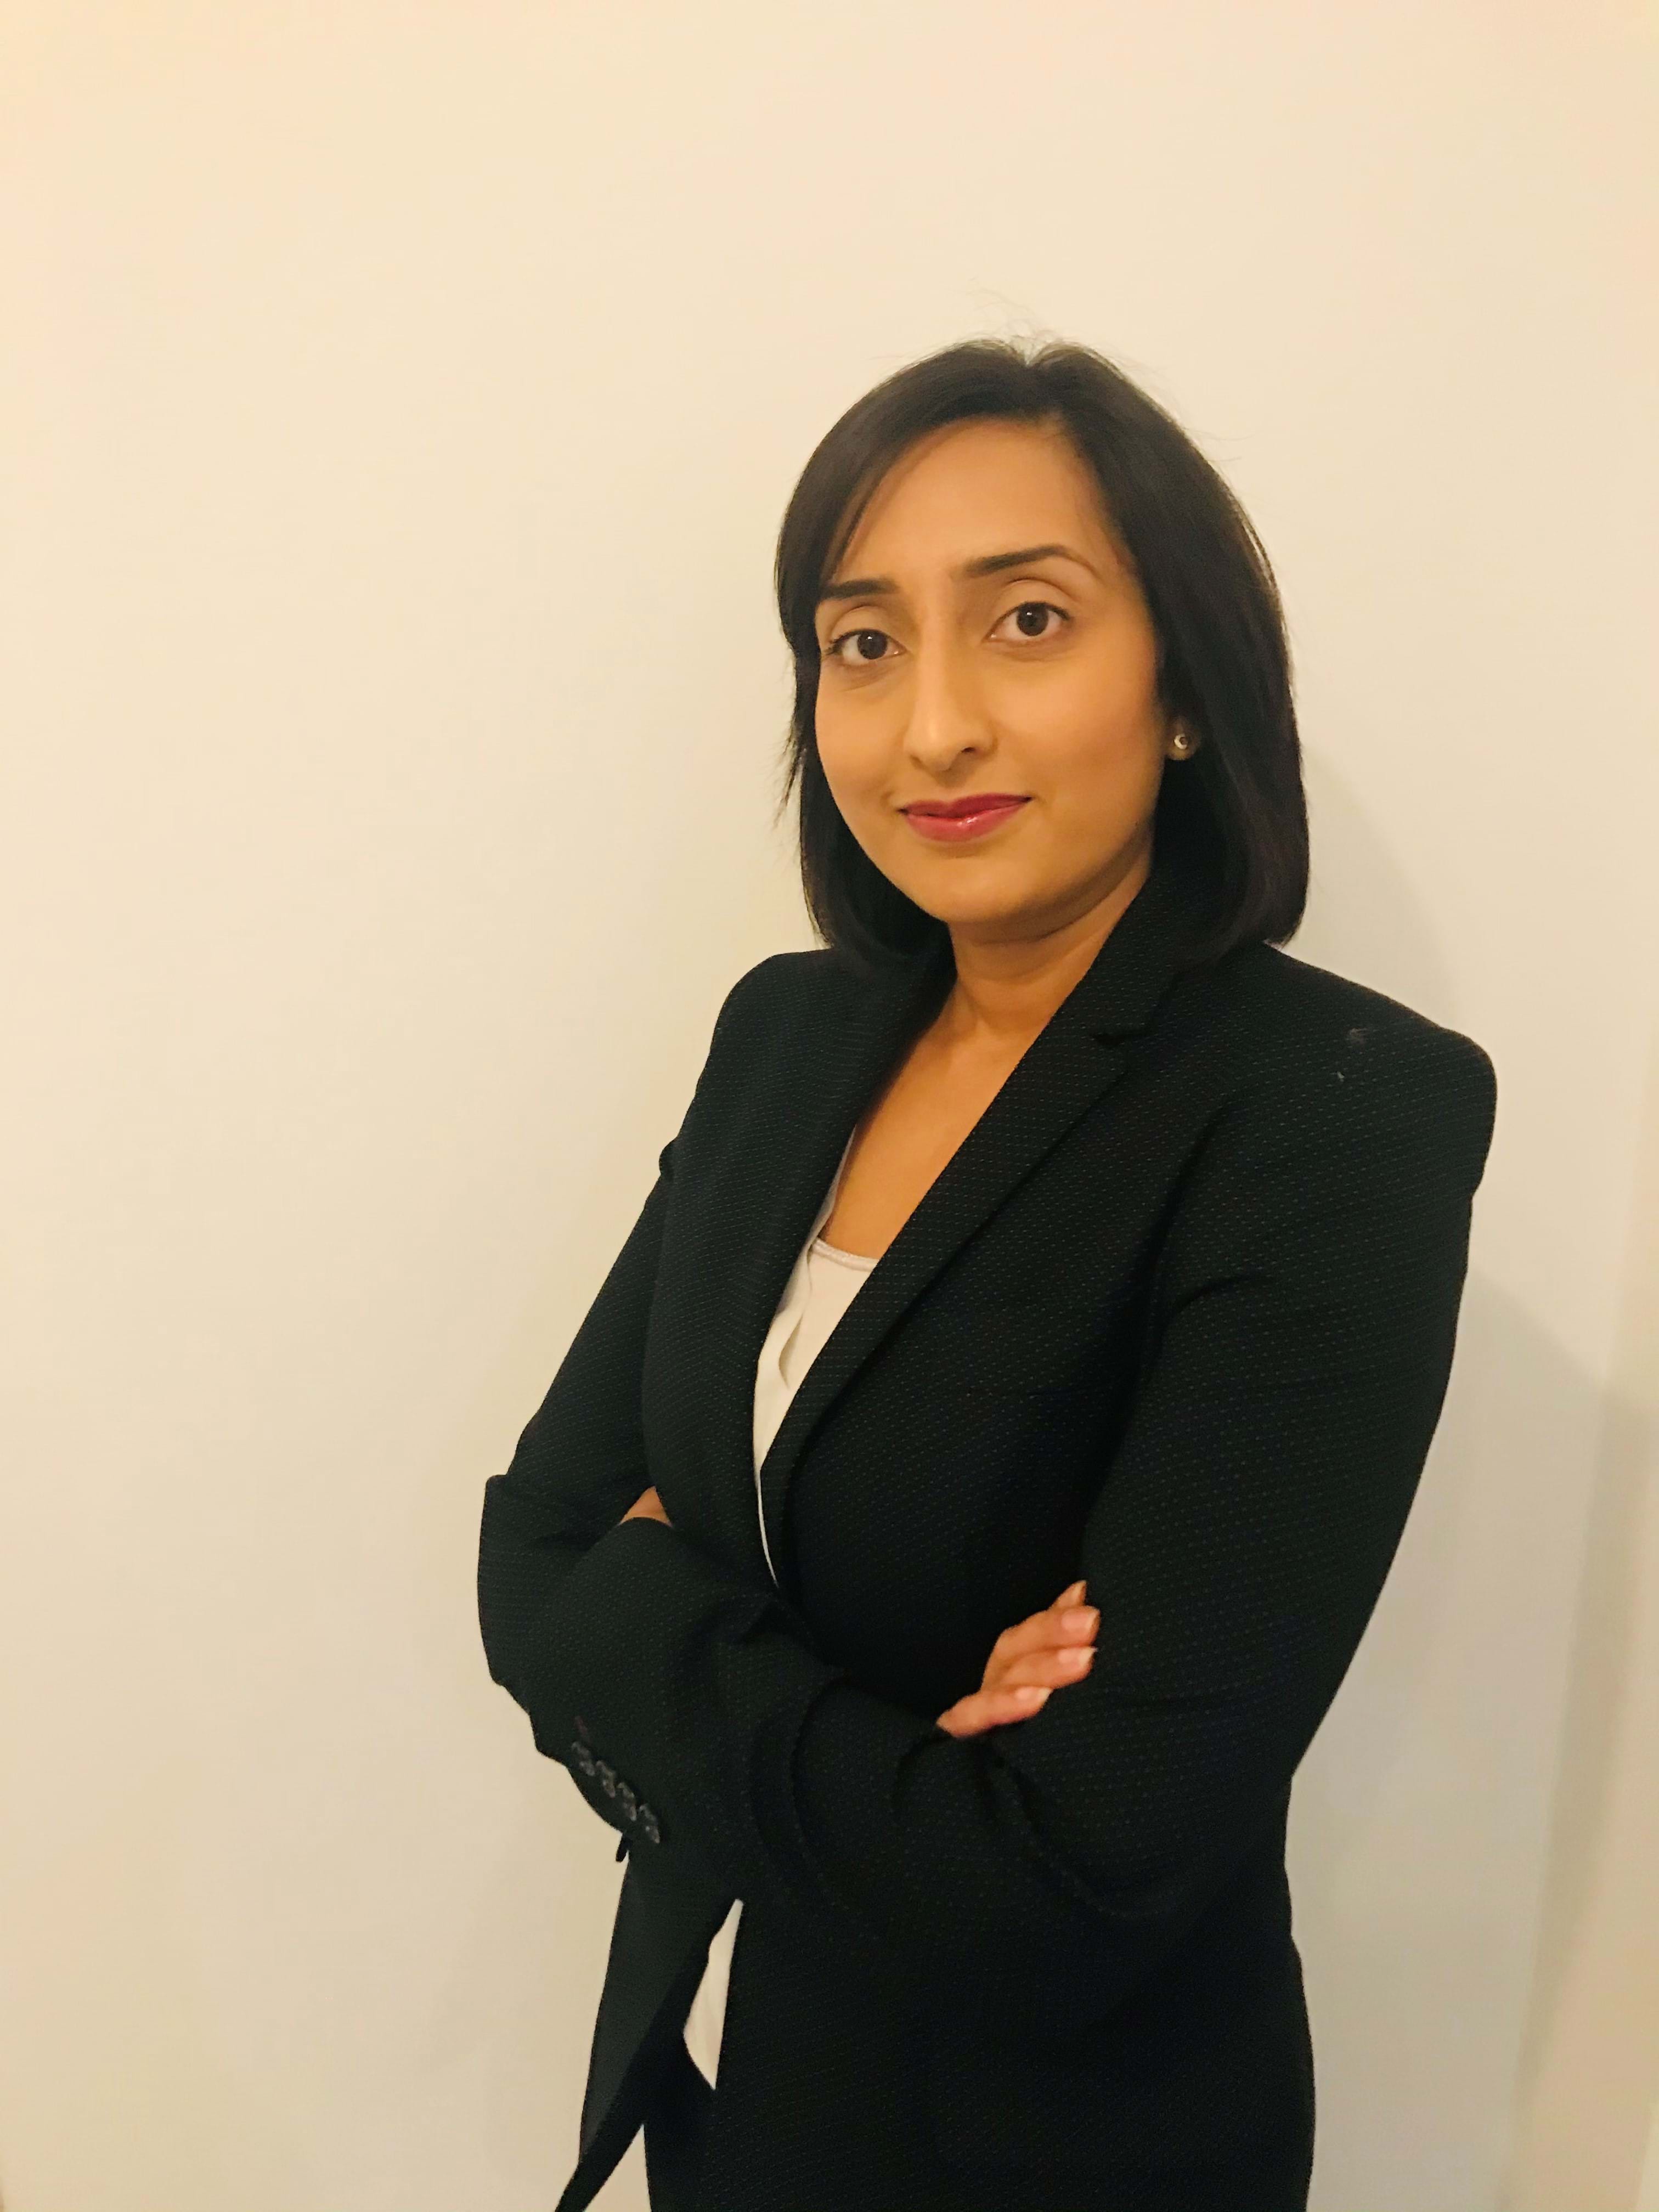 Harjinder Saundh from the Newcastle office